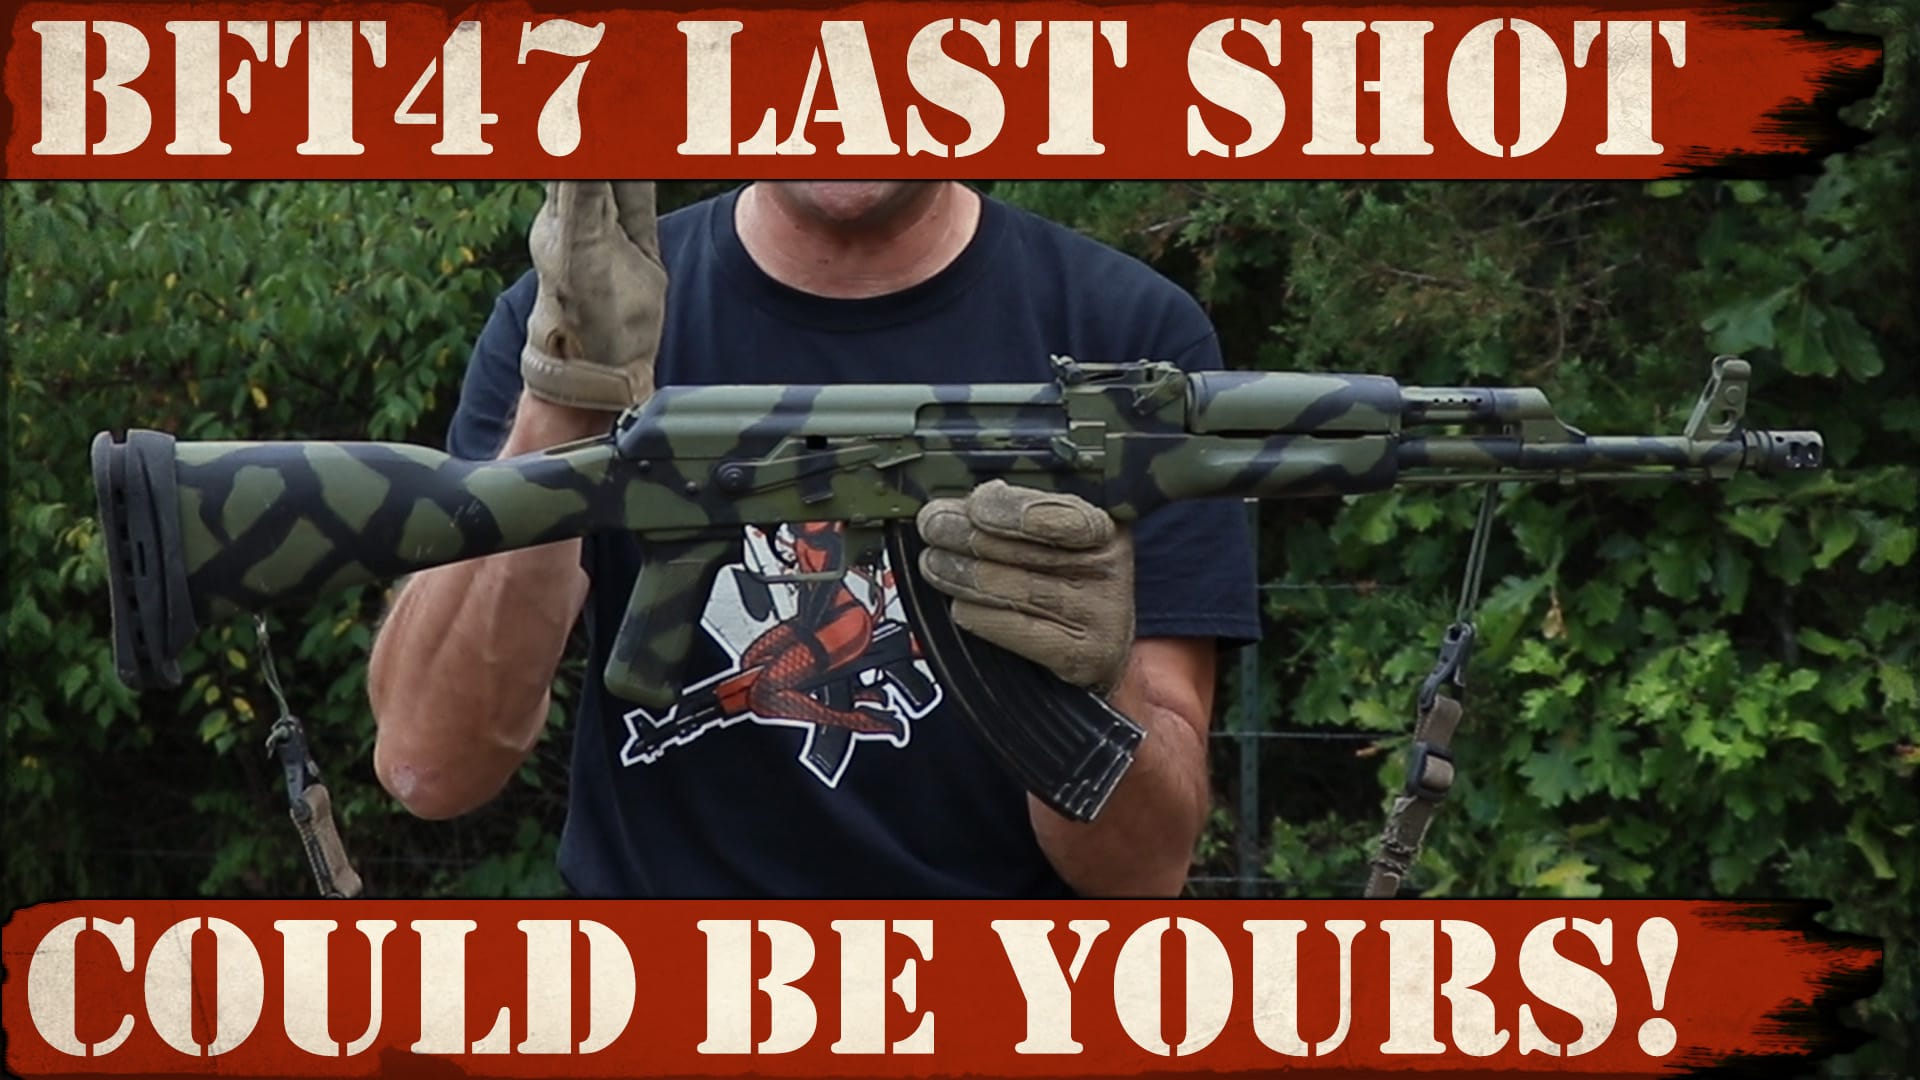 BFT47 Last Shot – Could be yours now!